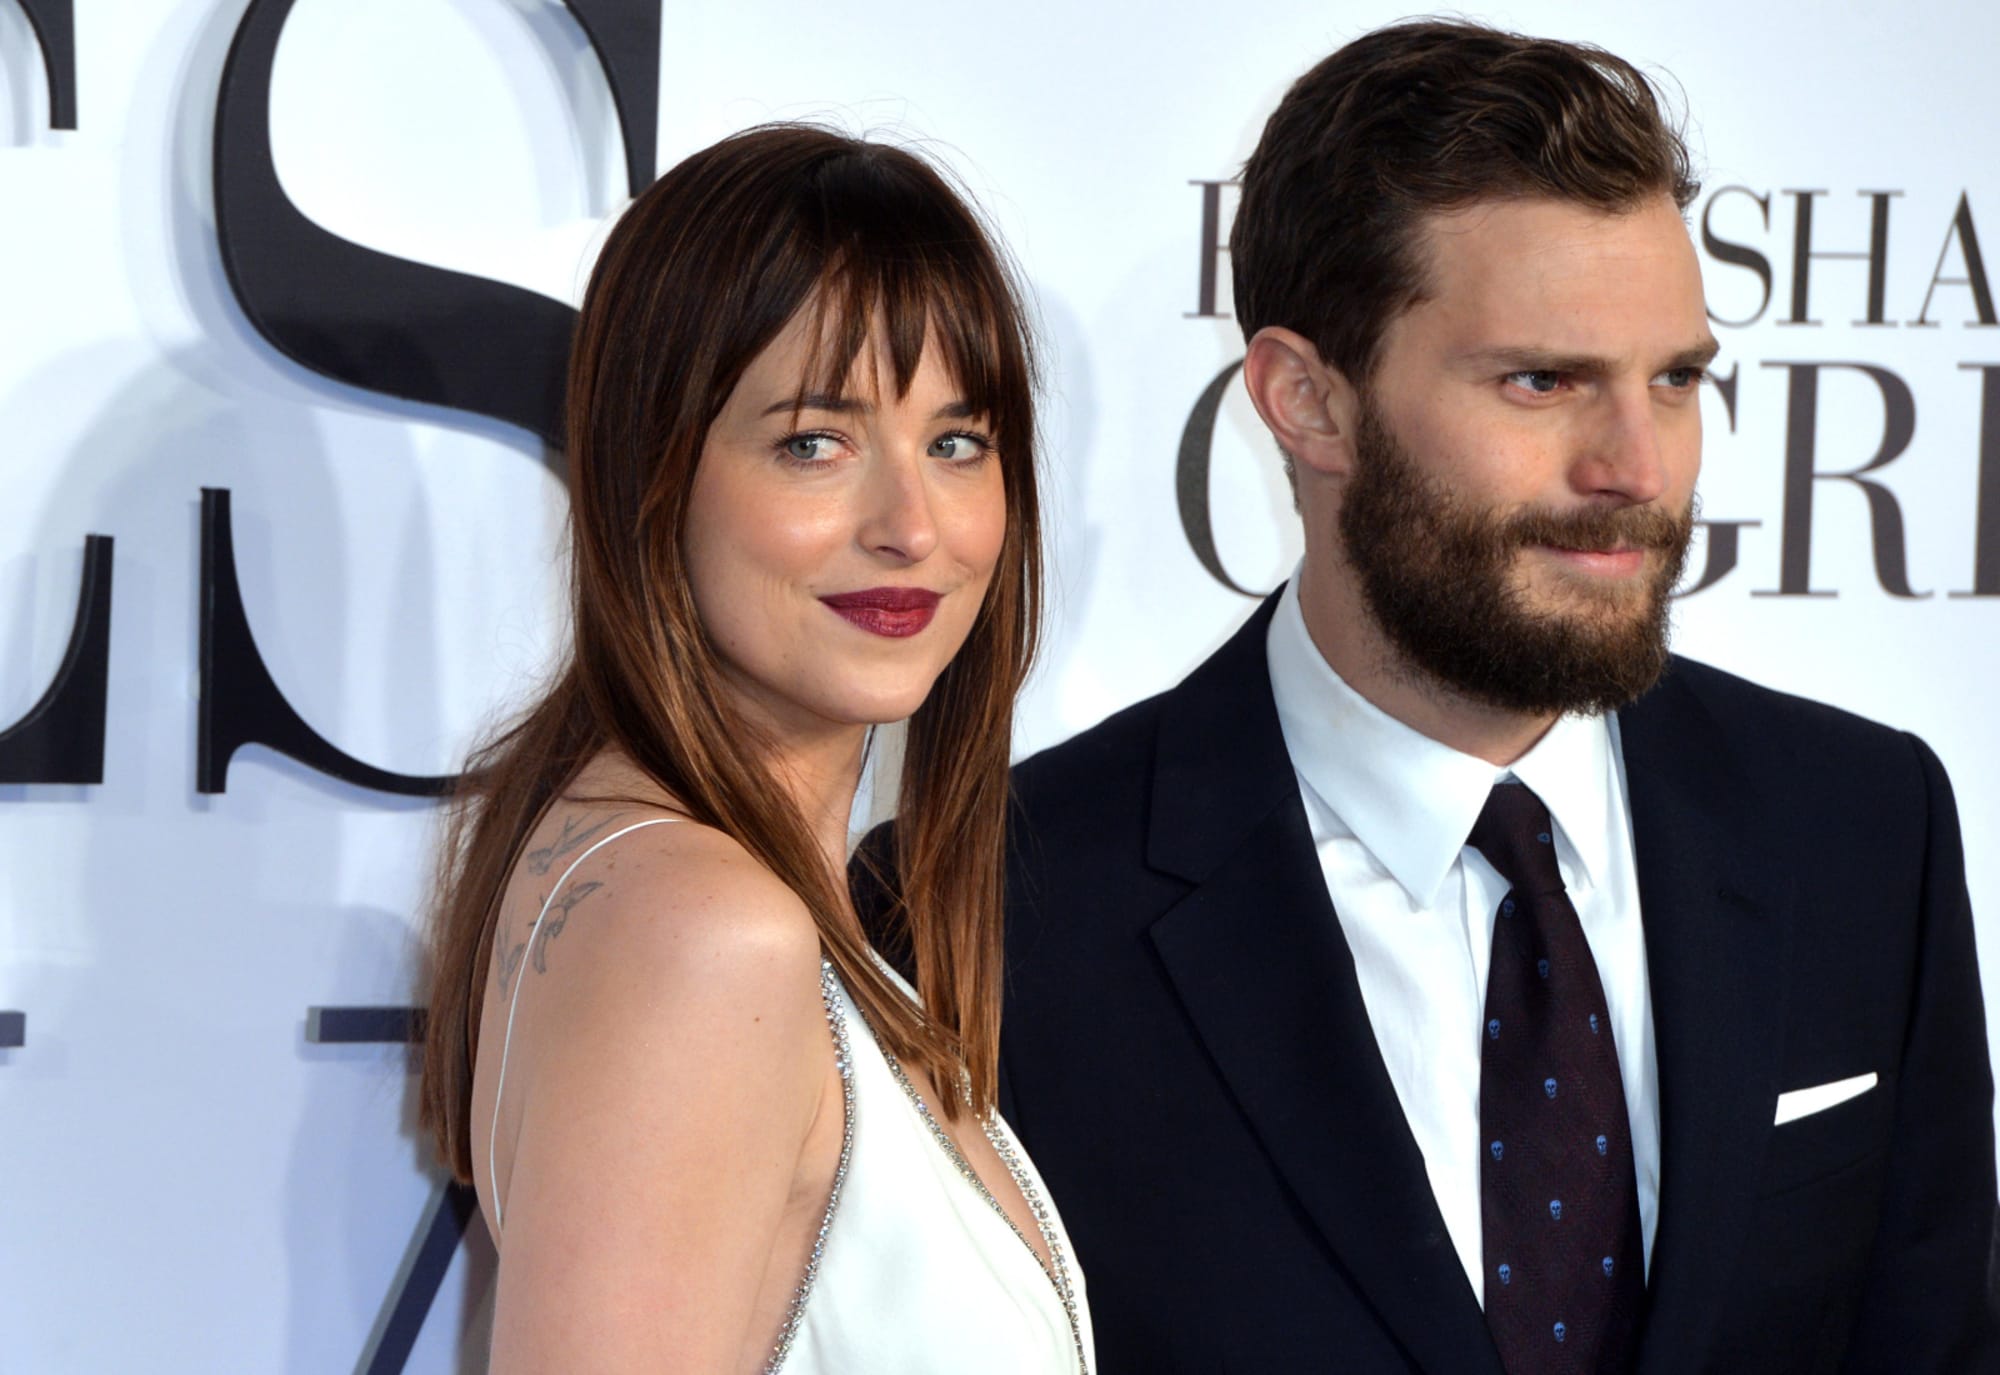 50 Shades Of Gray 2 Is Fifty Shades Darker on Netflix? Where to watch Fifty Shades Darker